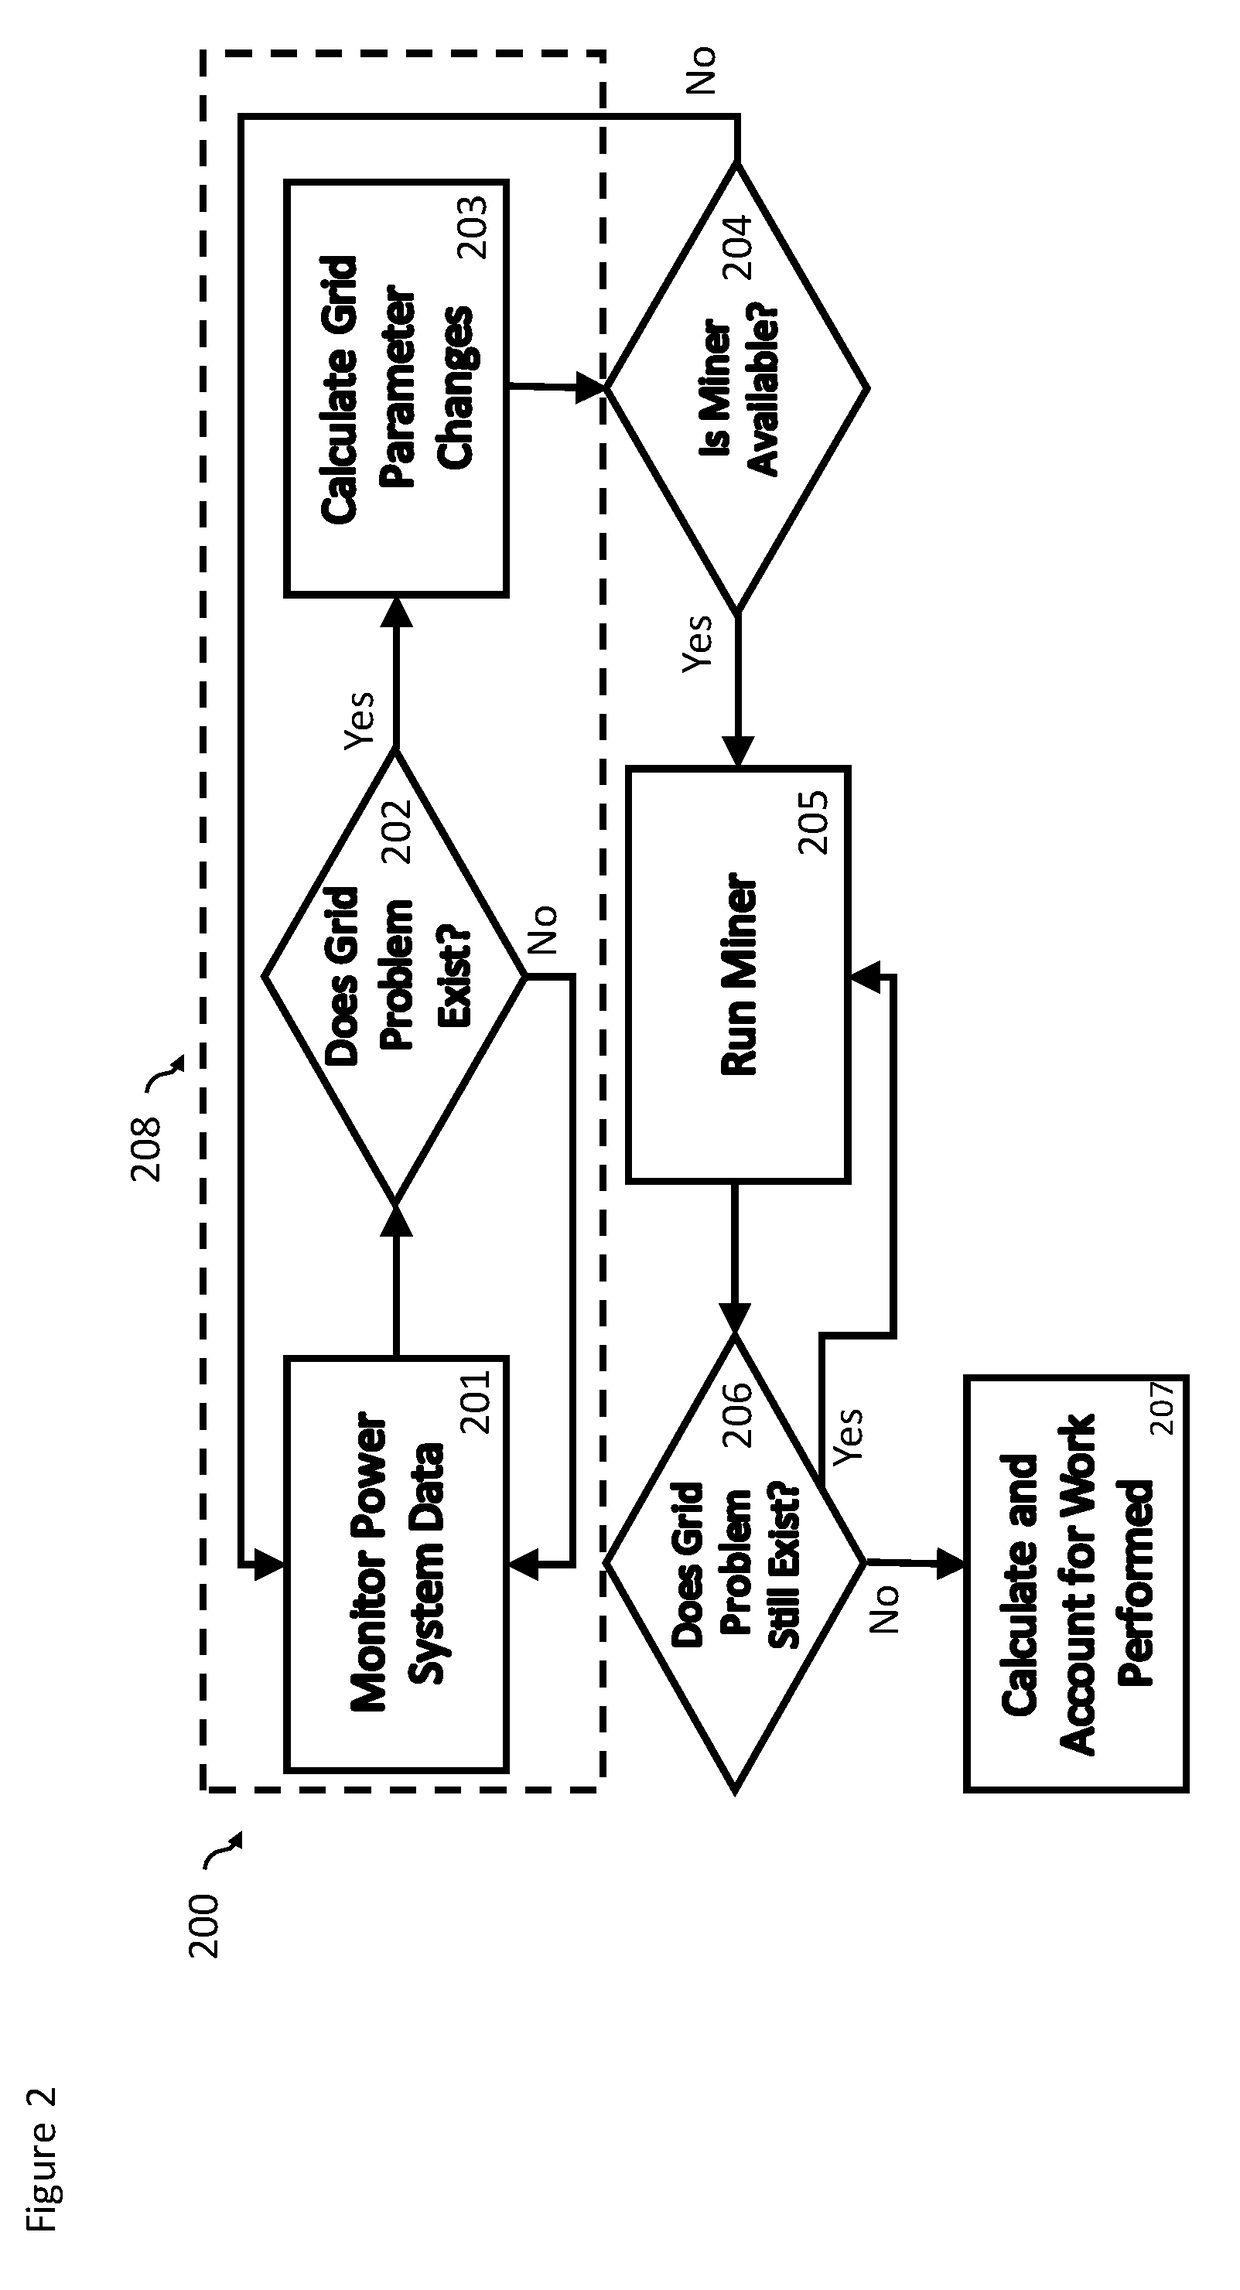 Method and system for mitigating transmission congestion via distributed computing and blockchain technology